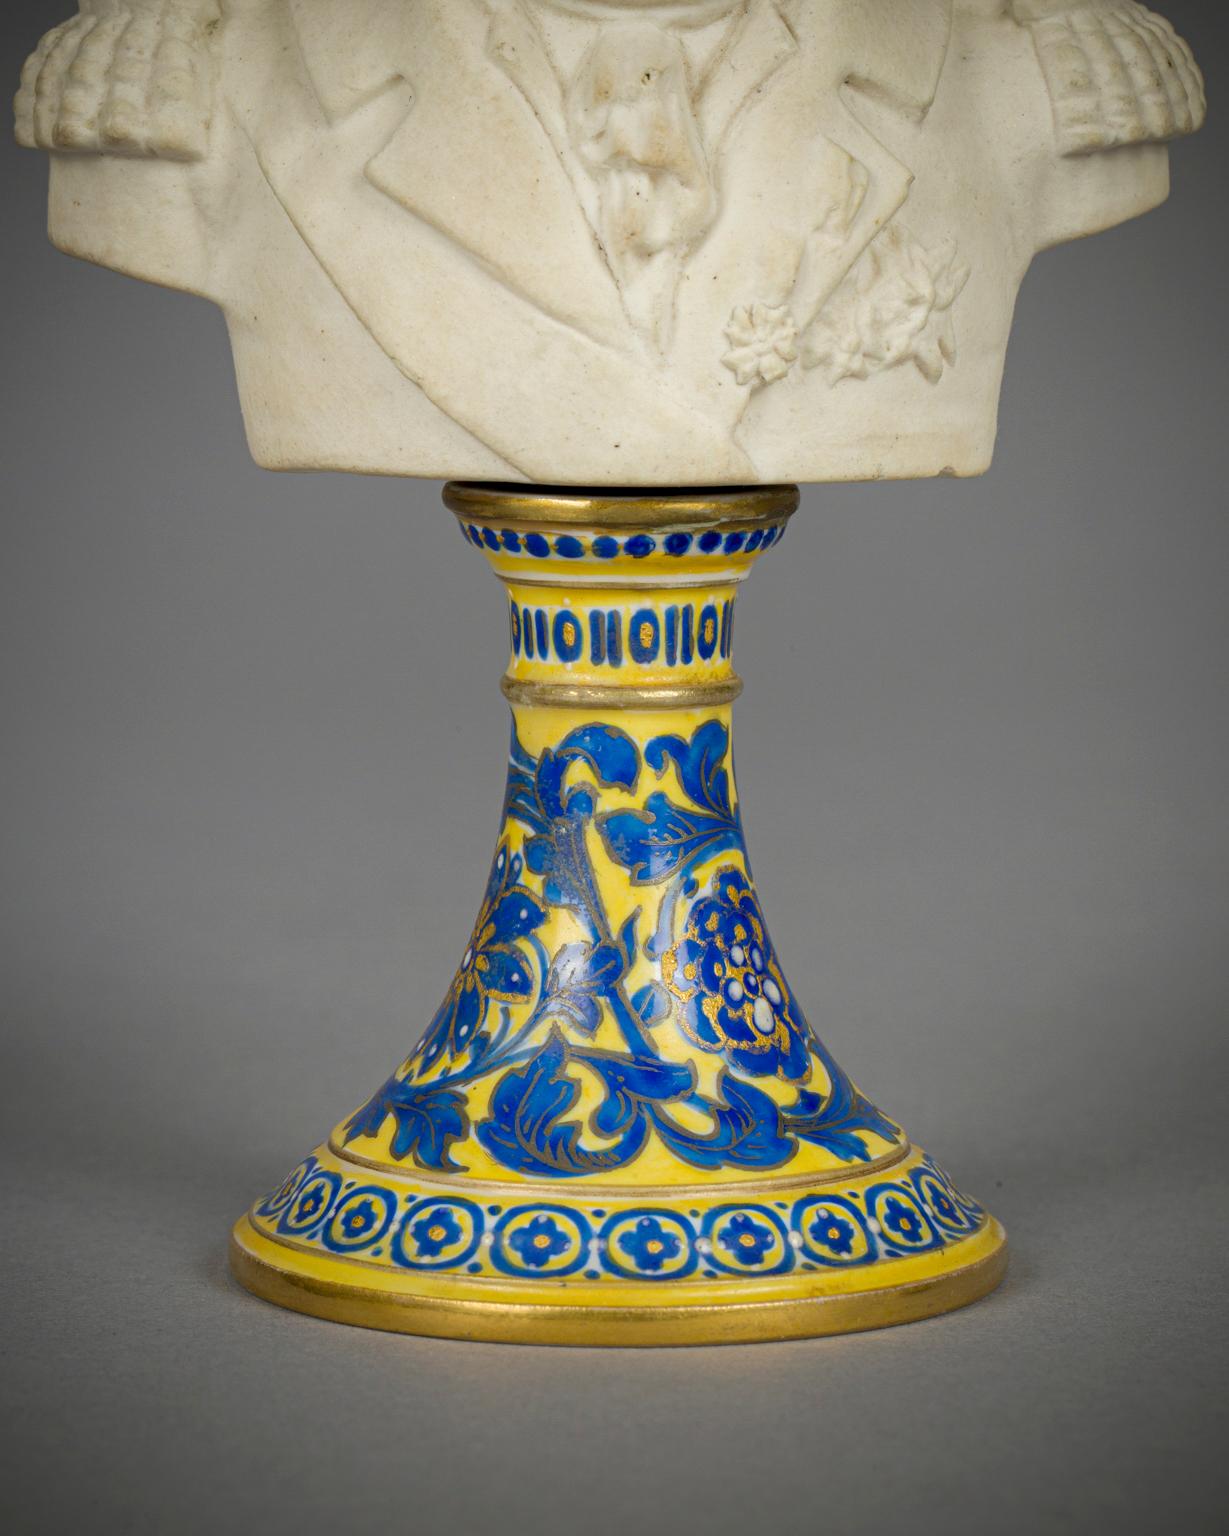 Now on a Sevres porcelain socle dated 1849.